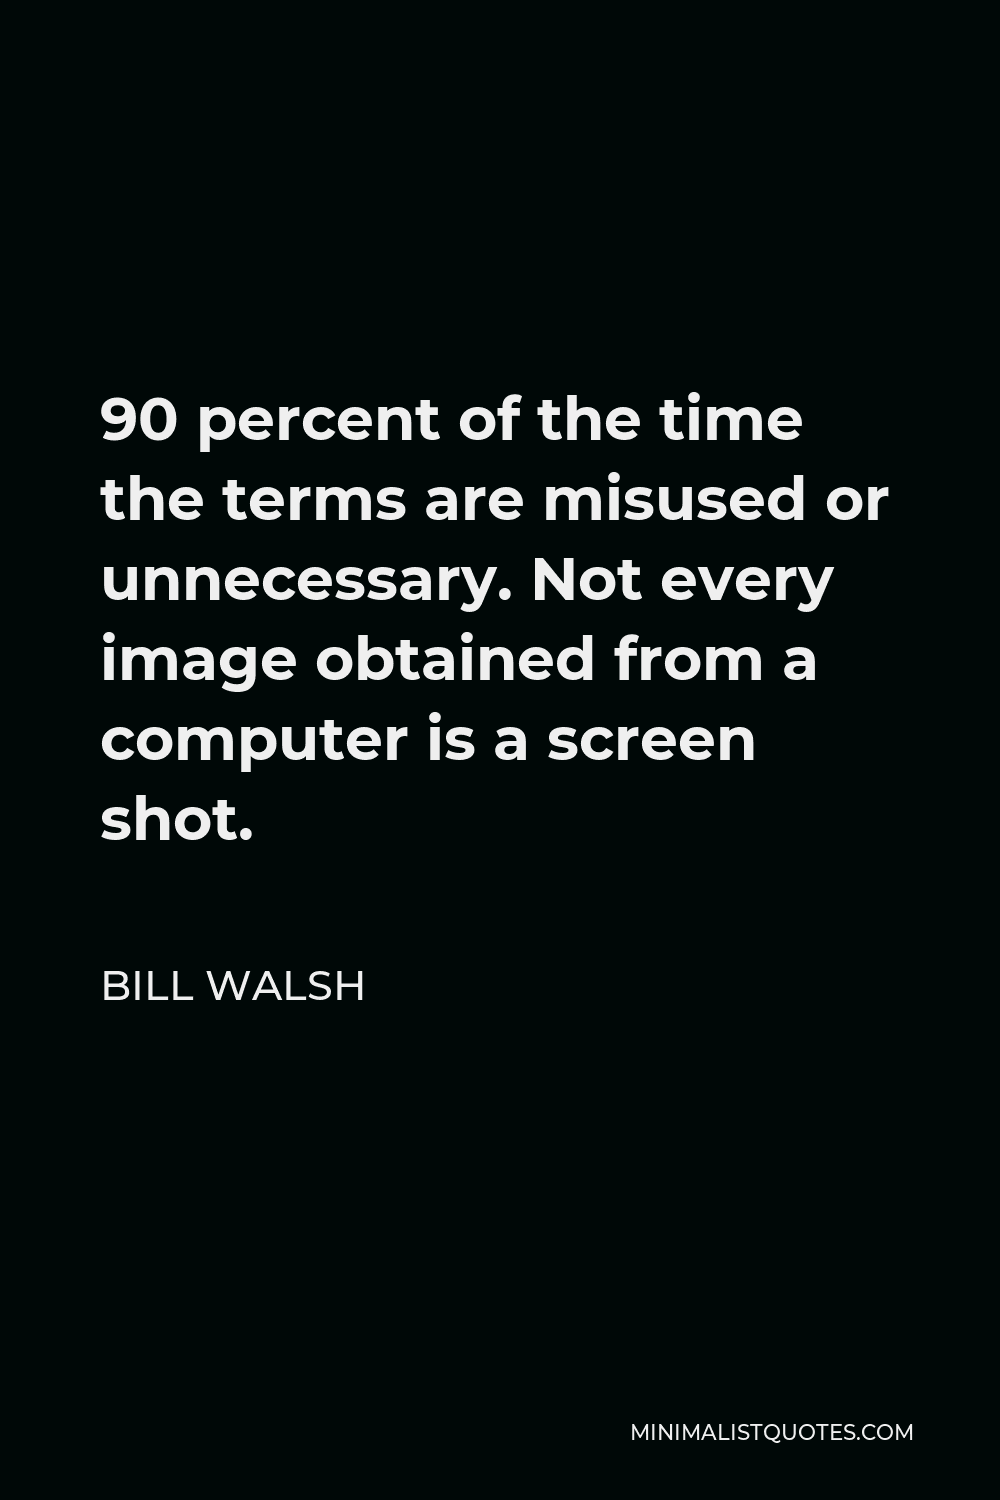 Bill Walsh Quote - 90 percent of the time the terms are misused or unnecessary. Not every image obtained from a computer is a screen shot.